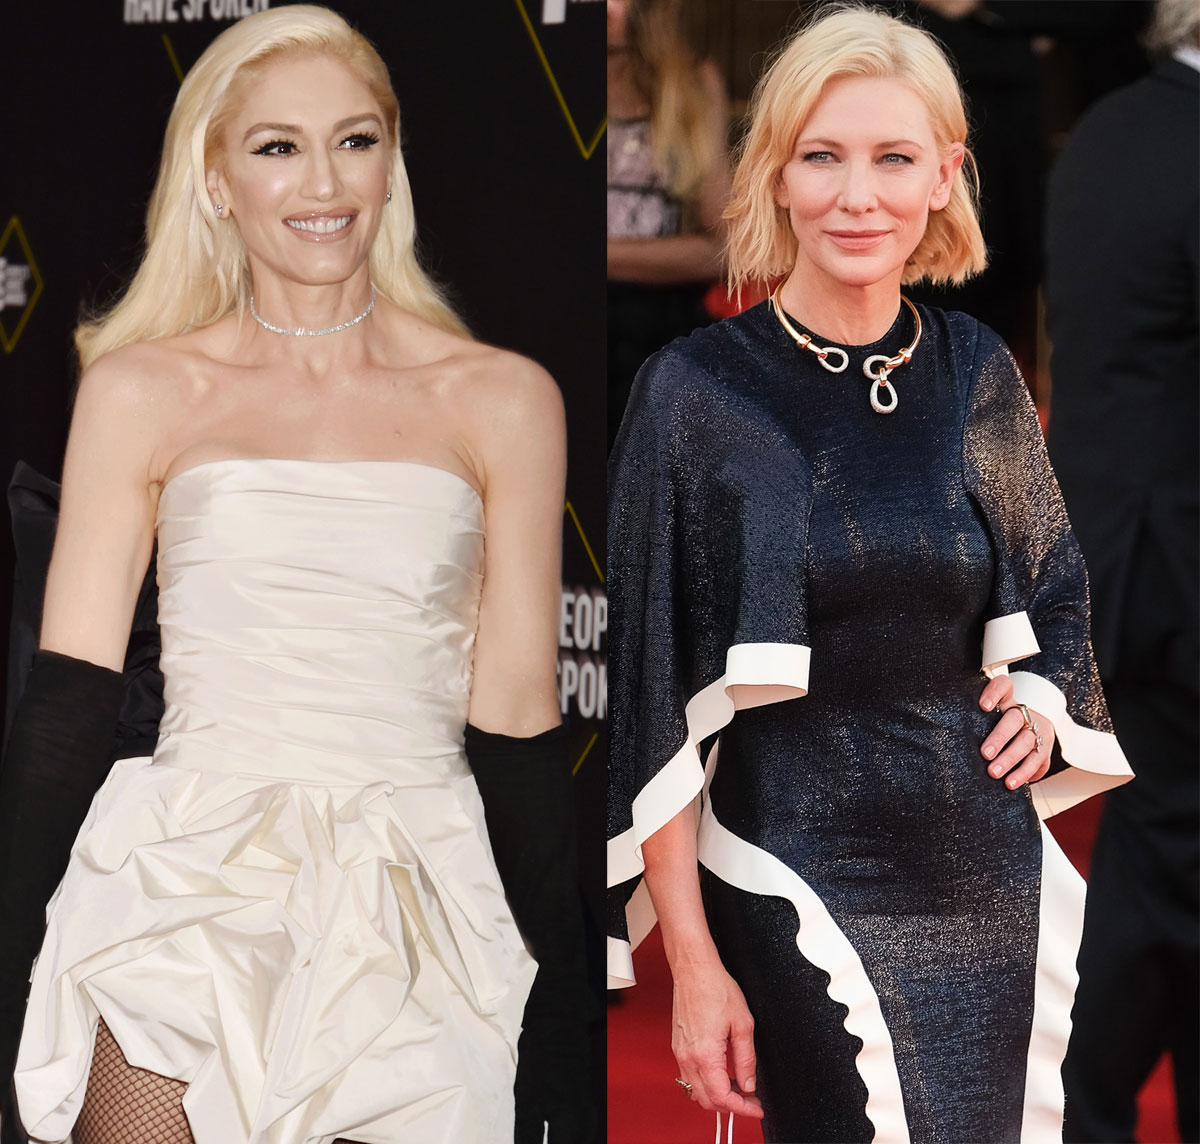 Gwen Stefani and Cate Blanchett are actually the same age!